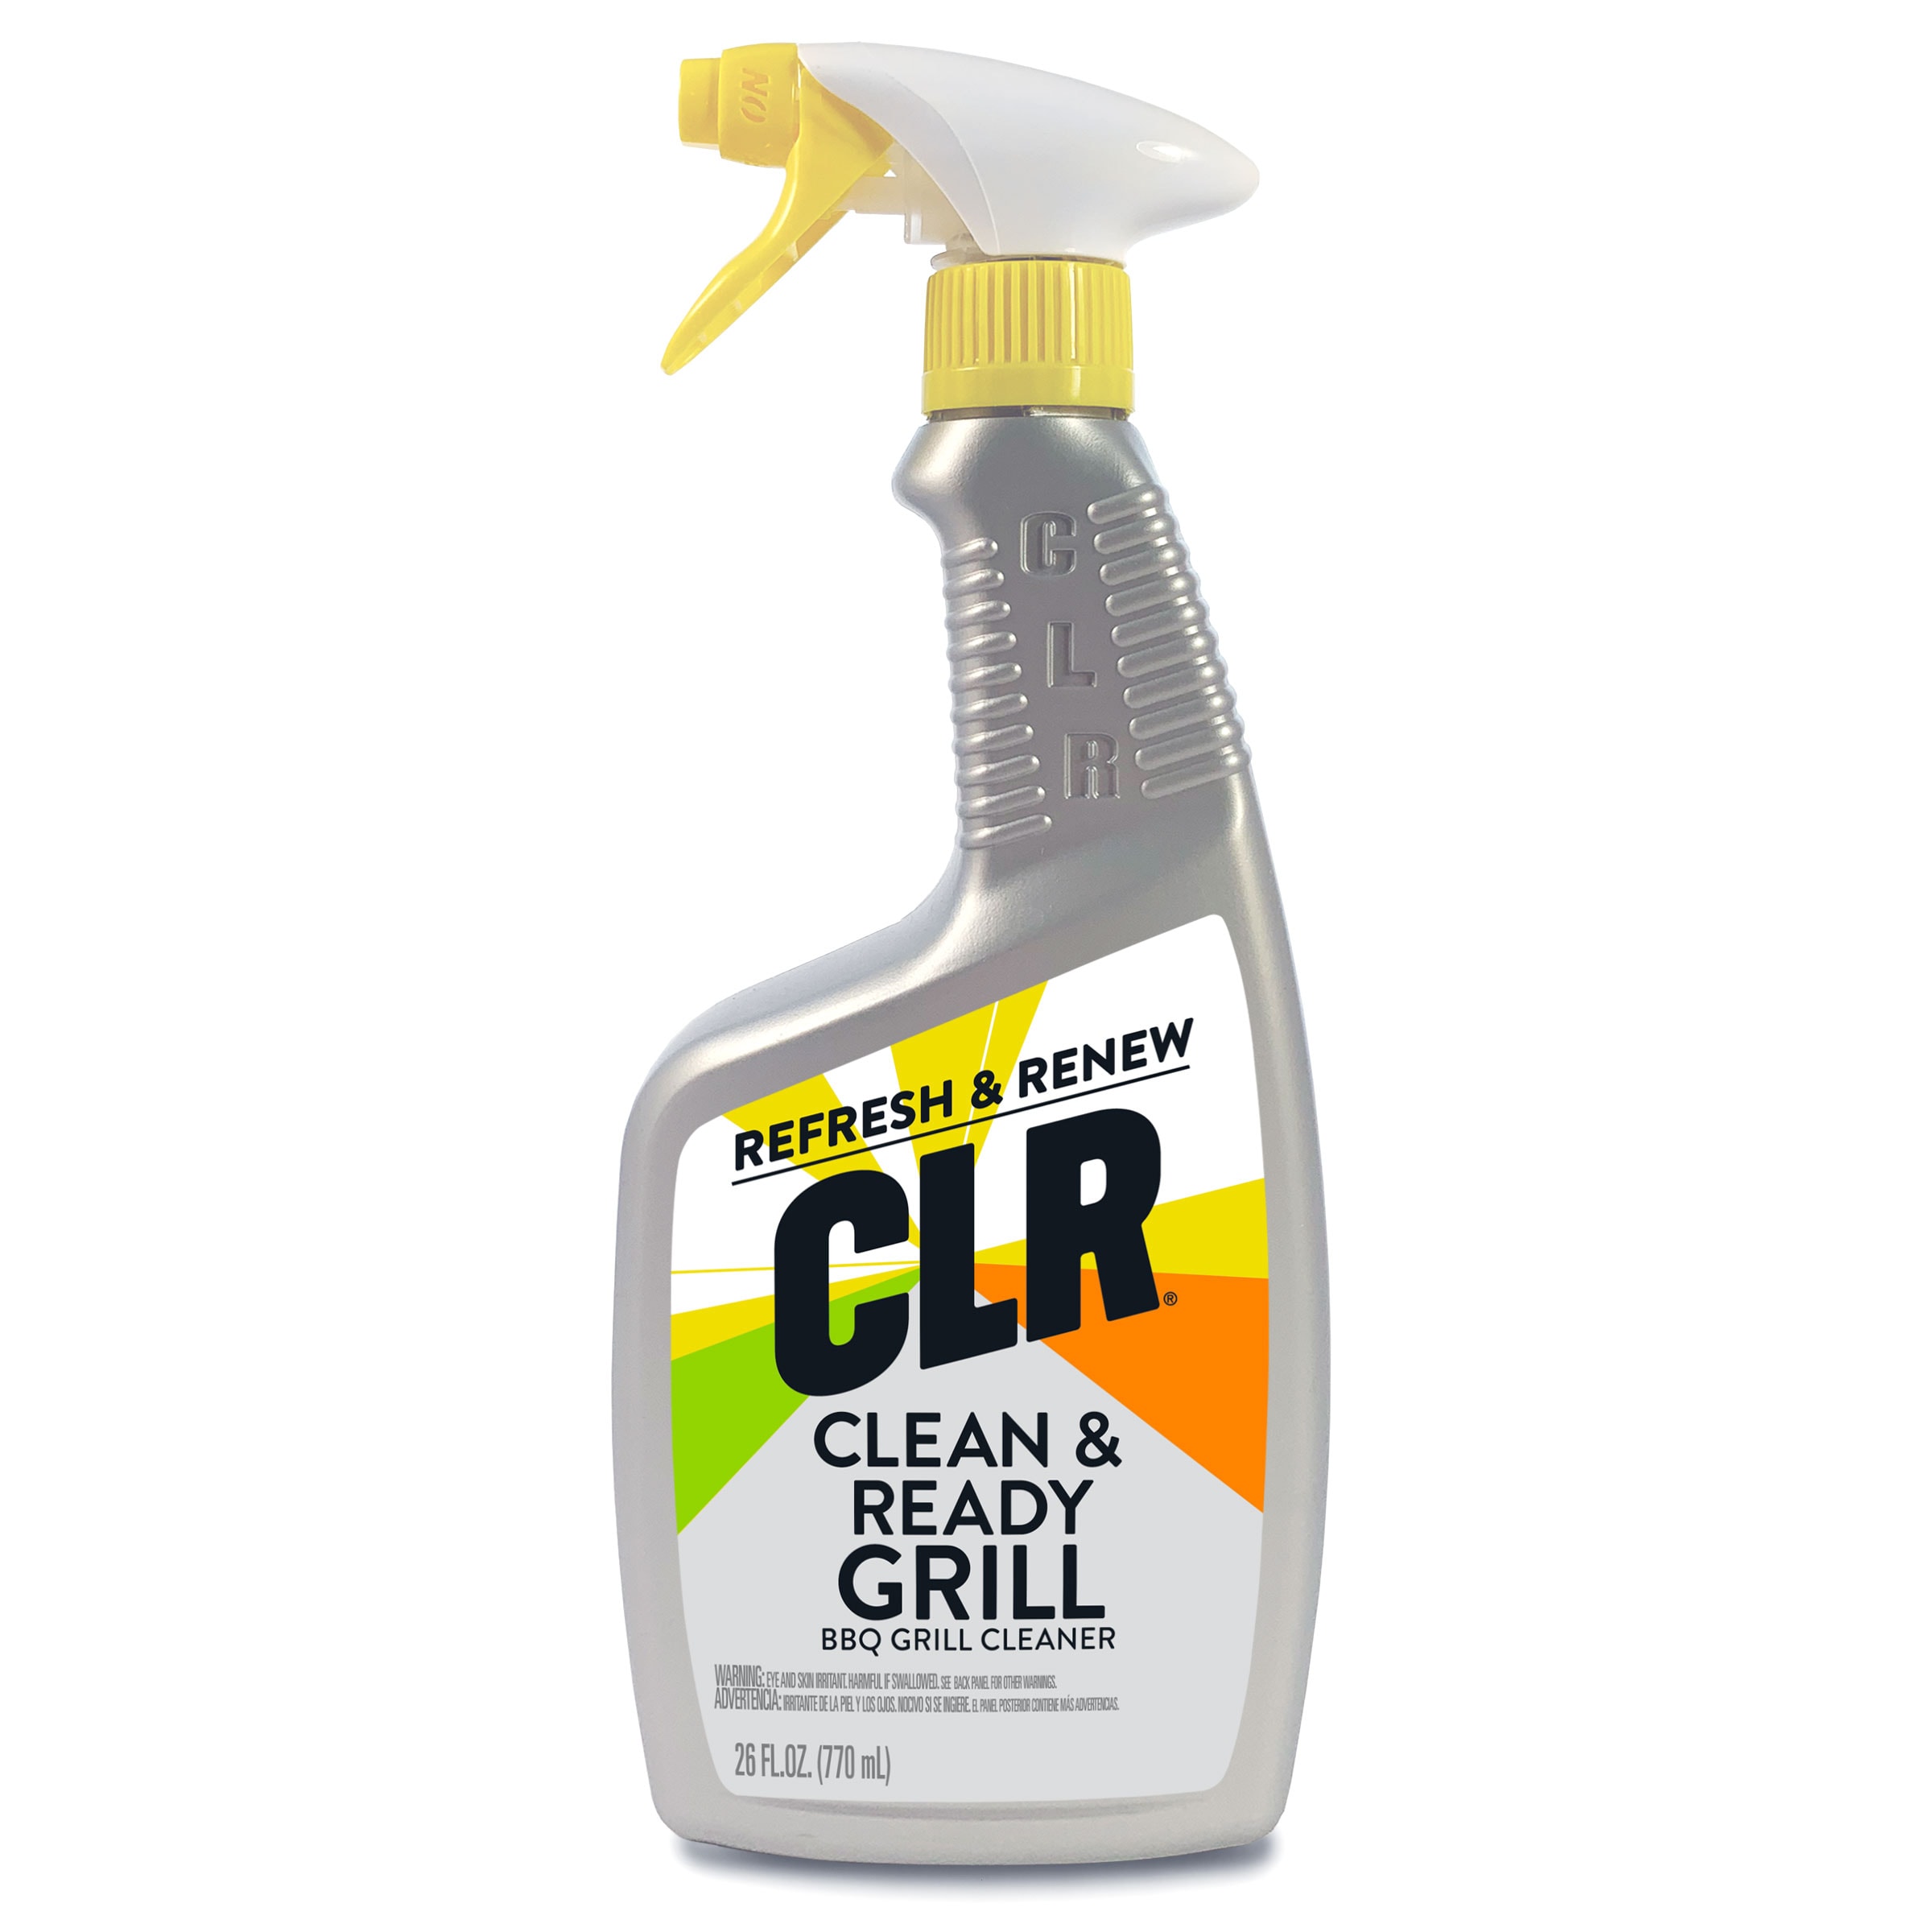 CLR 26-oz Grill Grate/Grid Cleaner, Powerful Foaming Action, BBQ Grill,  Smoker, Deep Fryer, Water-Based Formula